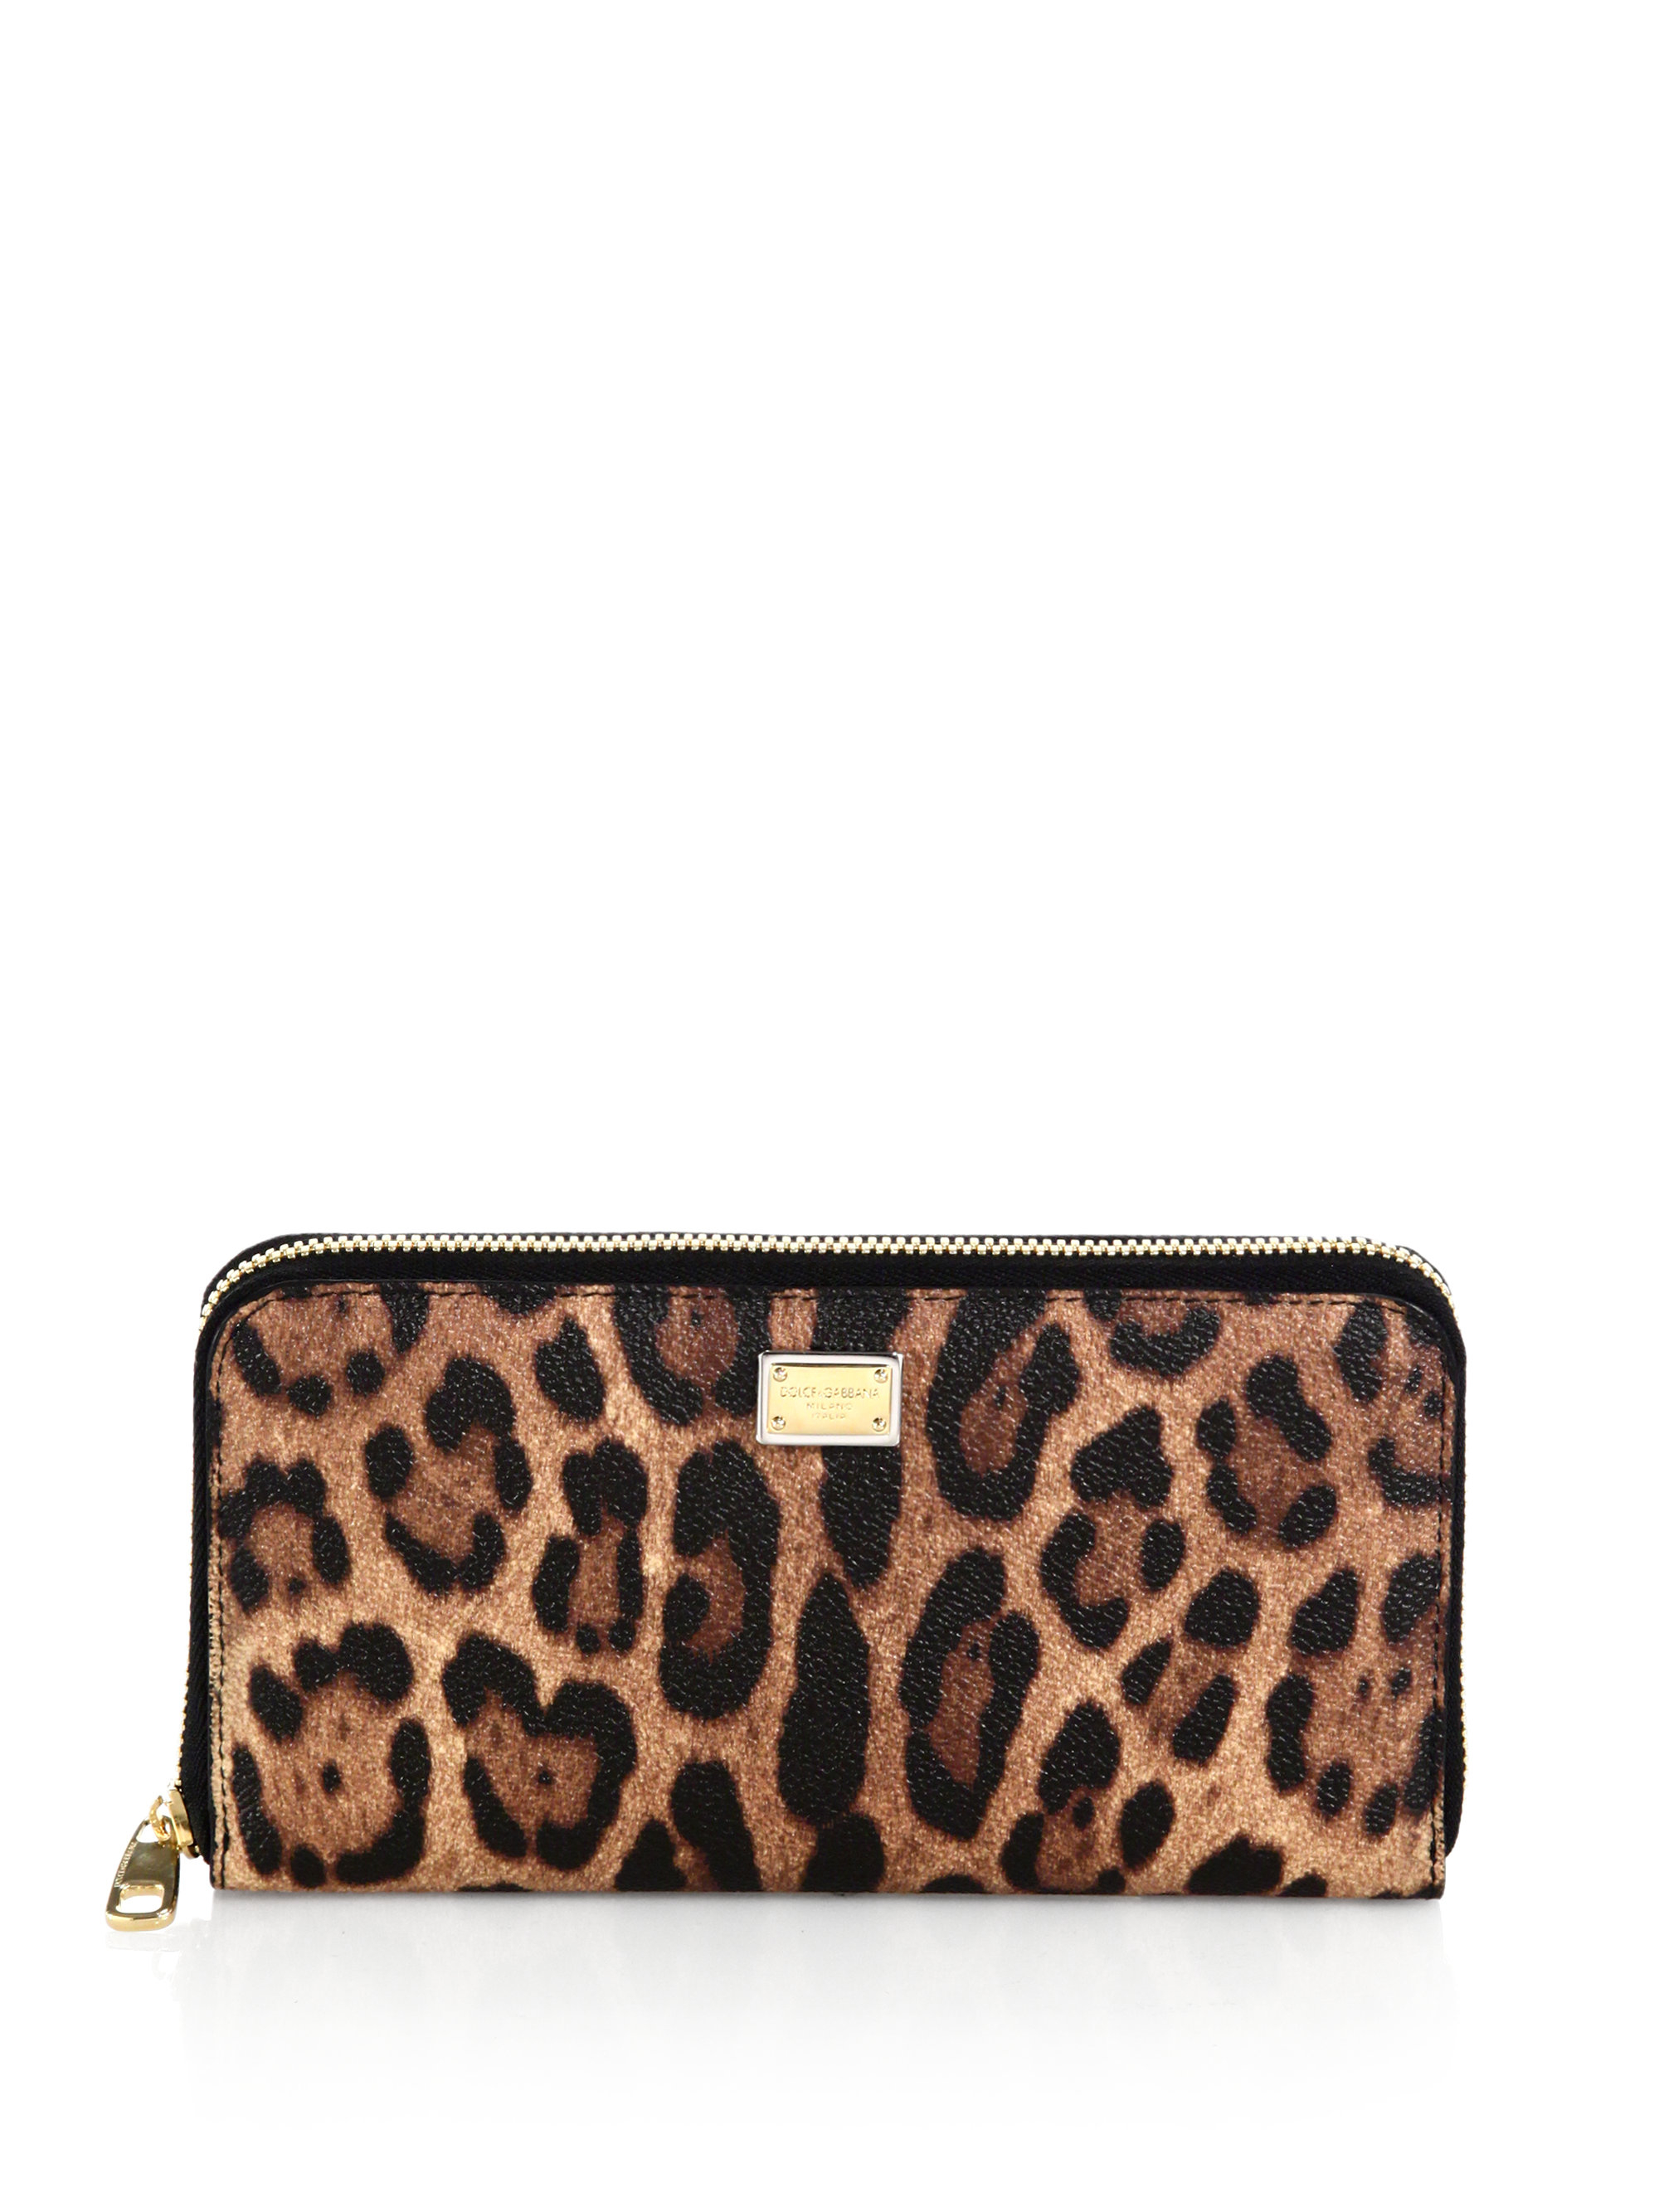 Dolce & Gabbana Crespo Leopard Leather Continental Wallet in Animal ...